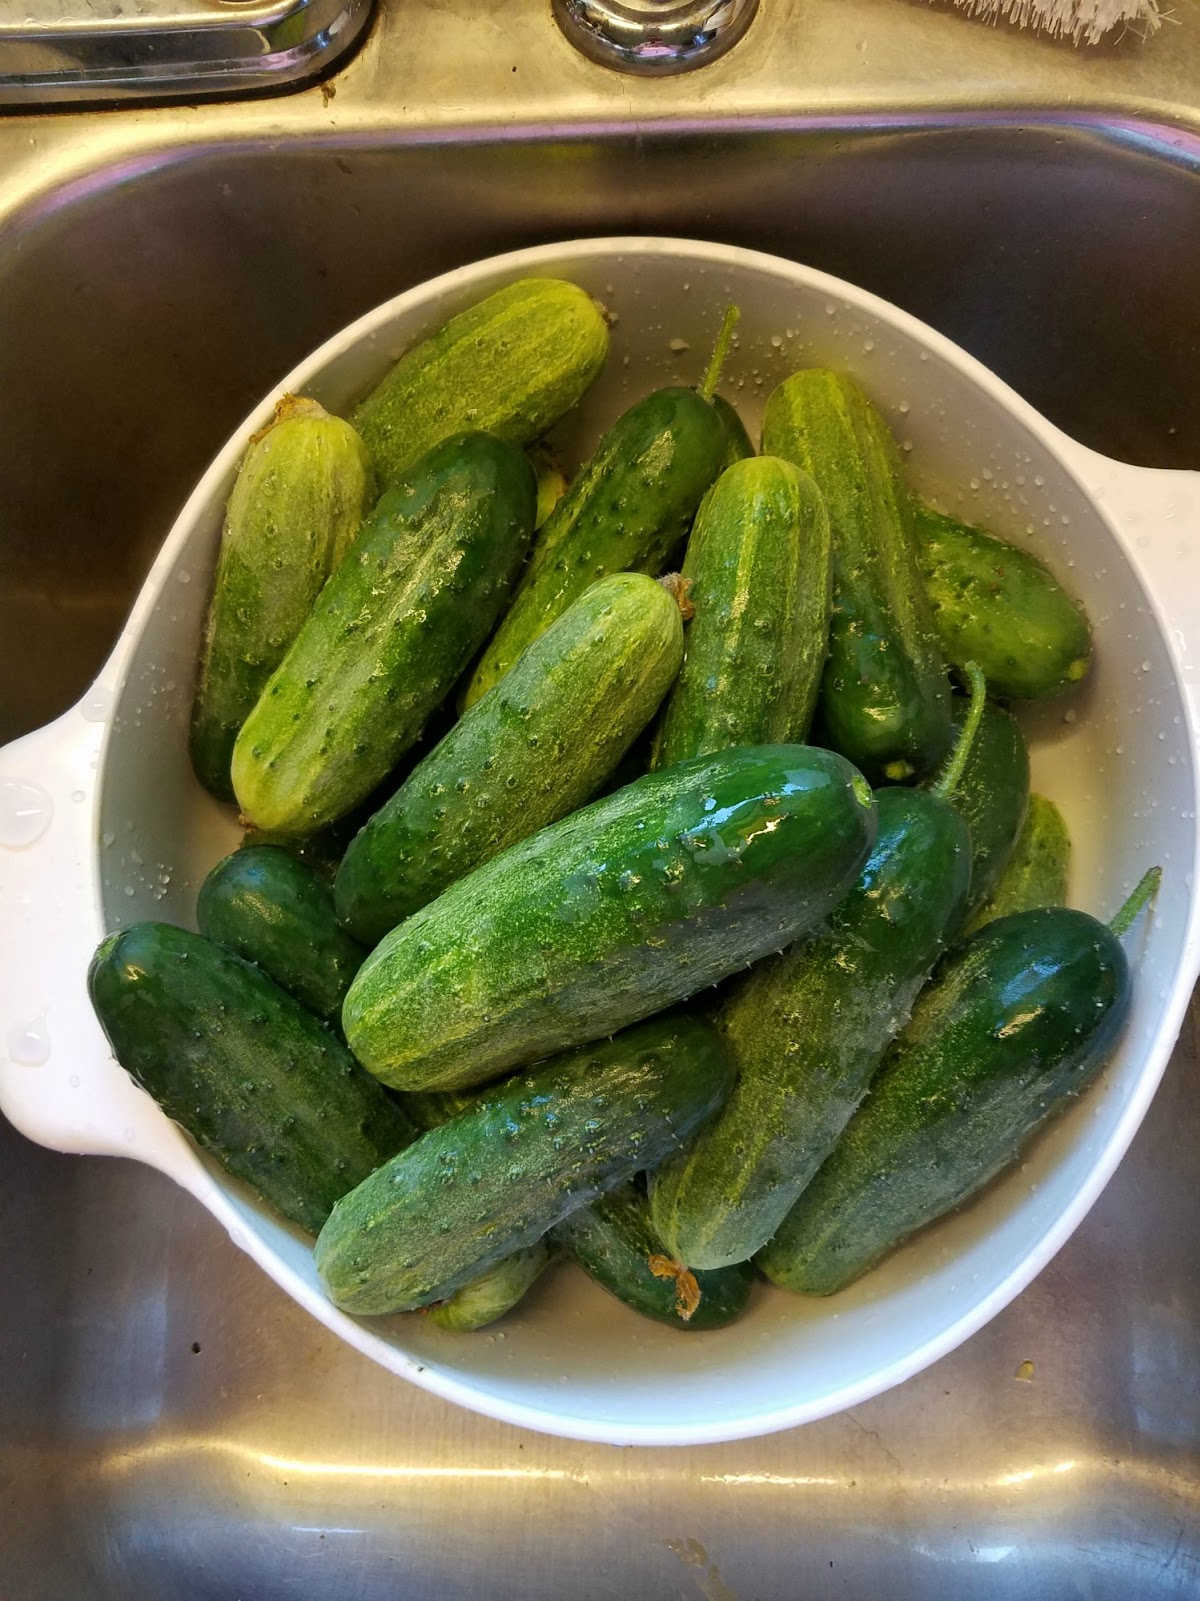 Pickling cucumbers in white strainer sitting in the kitchen sink being washed.